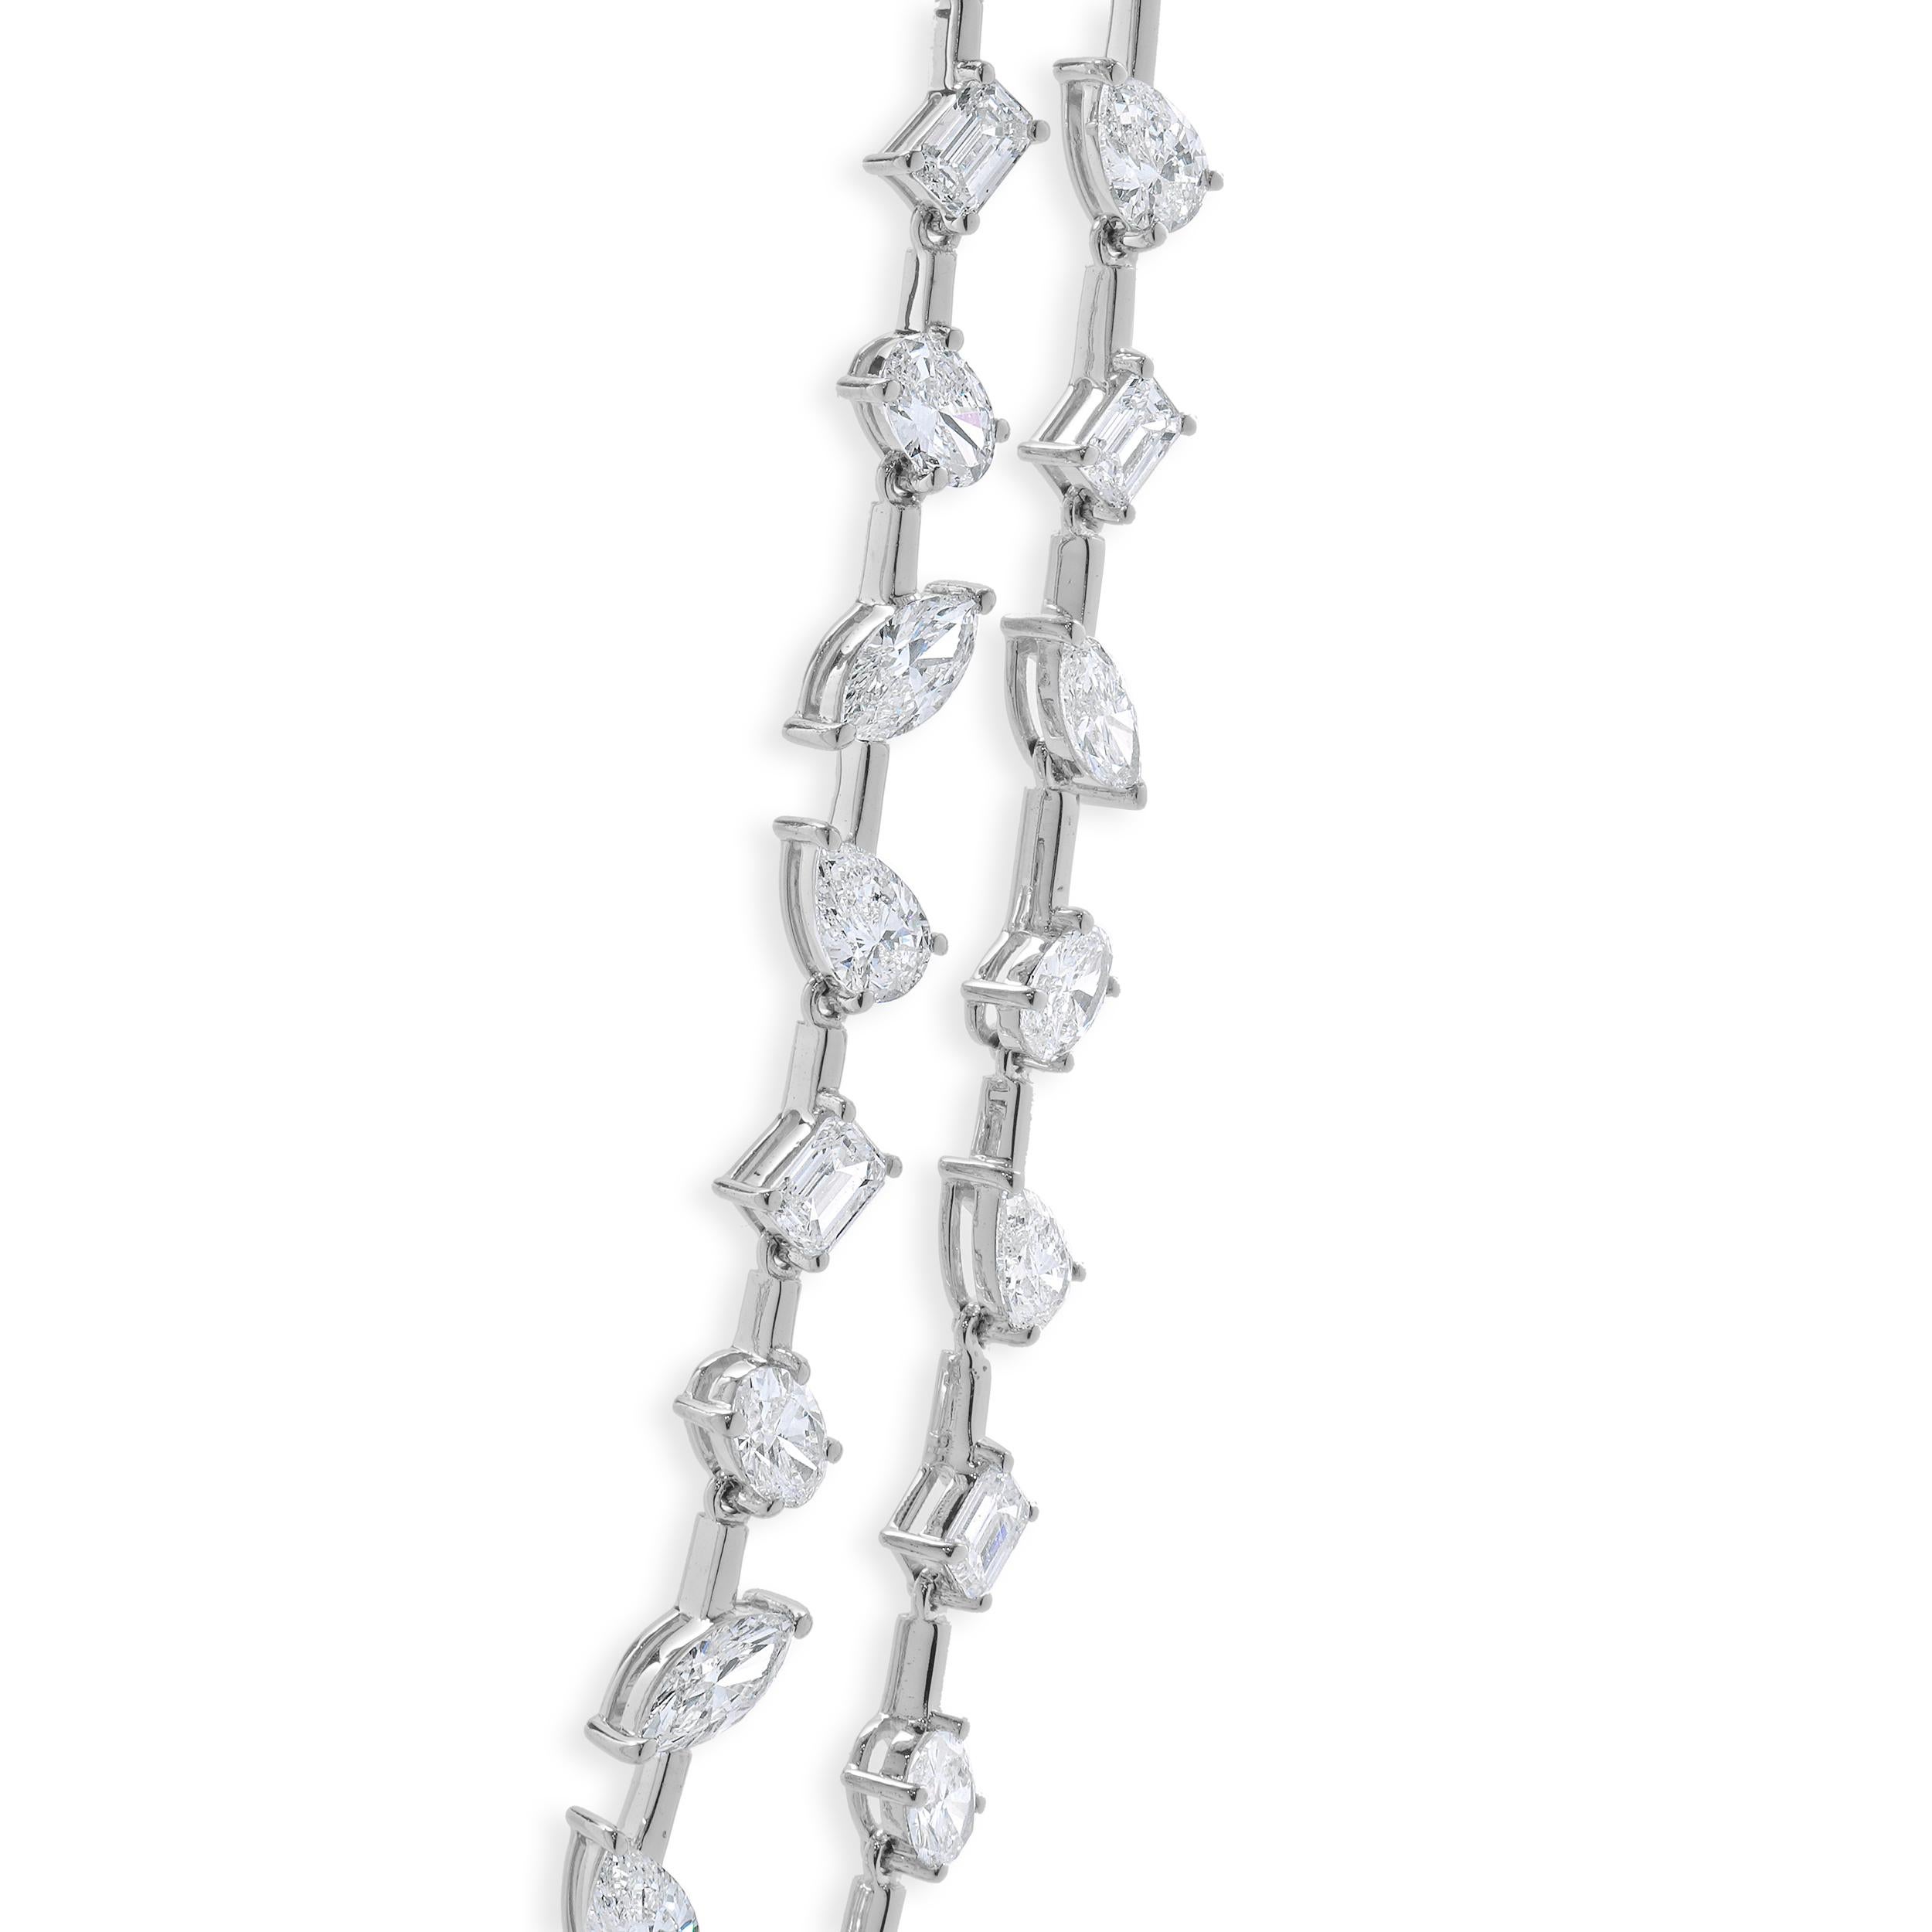 Designer: custom
Material: 14K white gold
Diamonds:  96 Multi-Shaped Diamonds= 17.74cttw
Color: G
Clarity:VS-SI1
Dimensions: necklace measures 16.5-inches in length 
Weight: 23.36 grams
